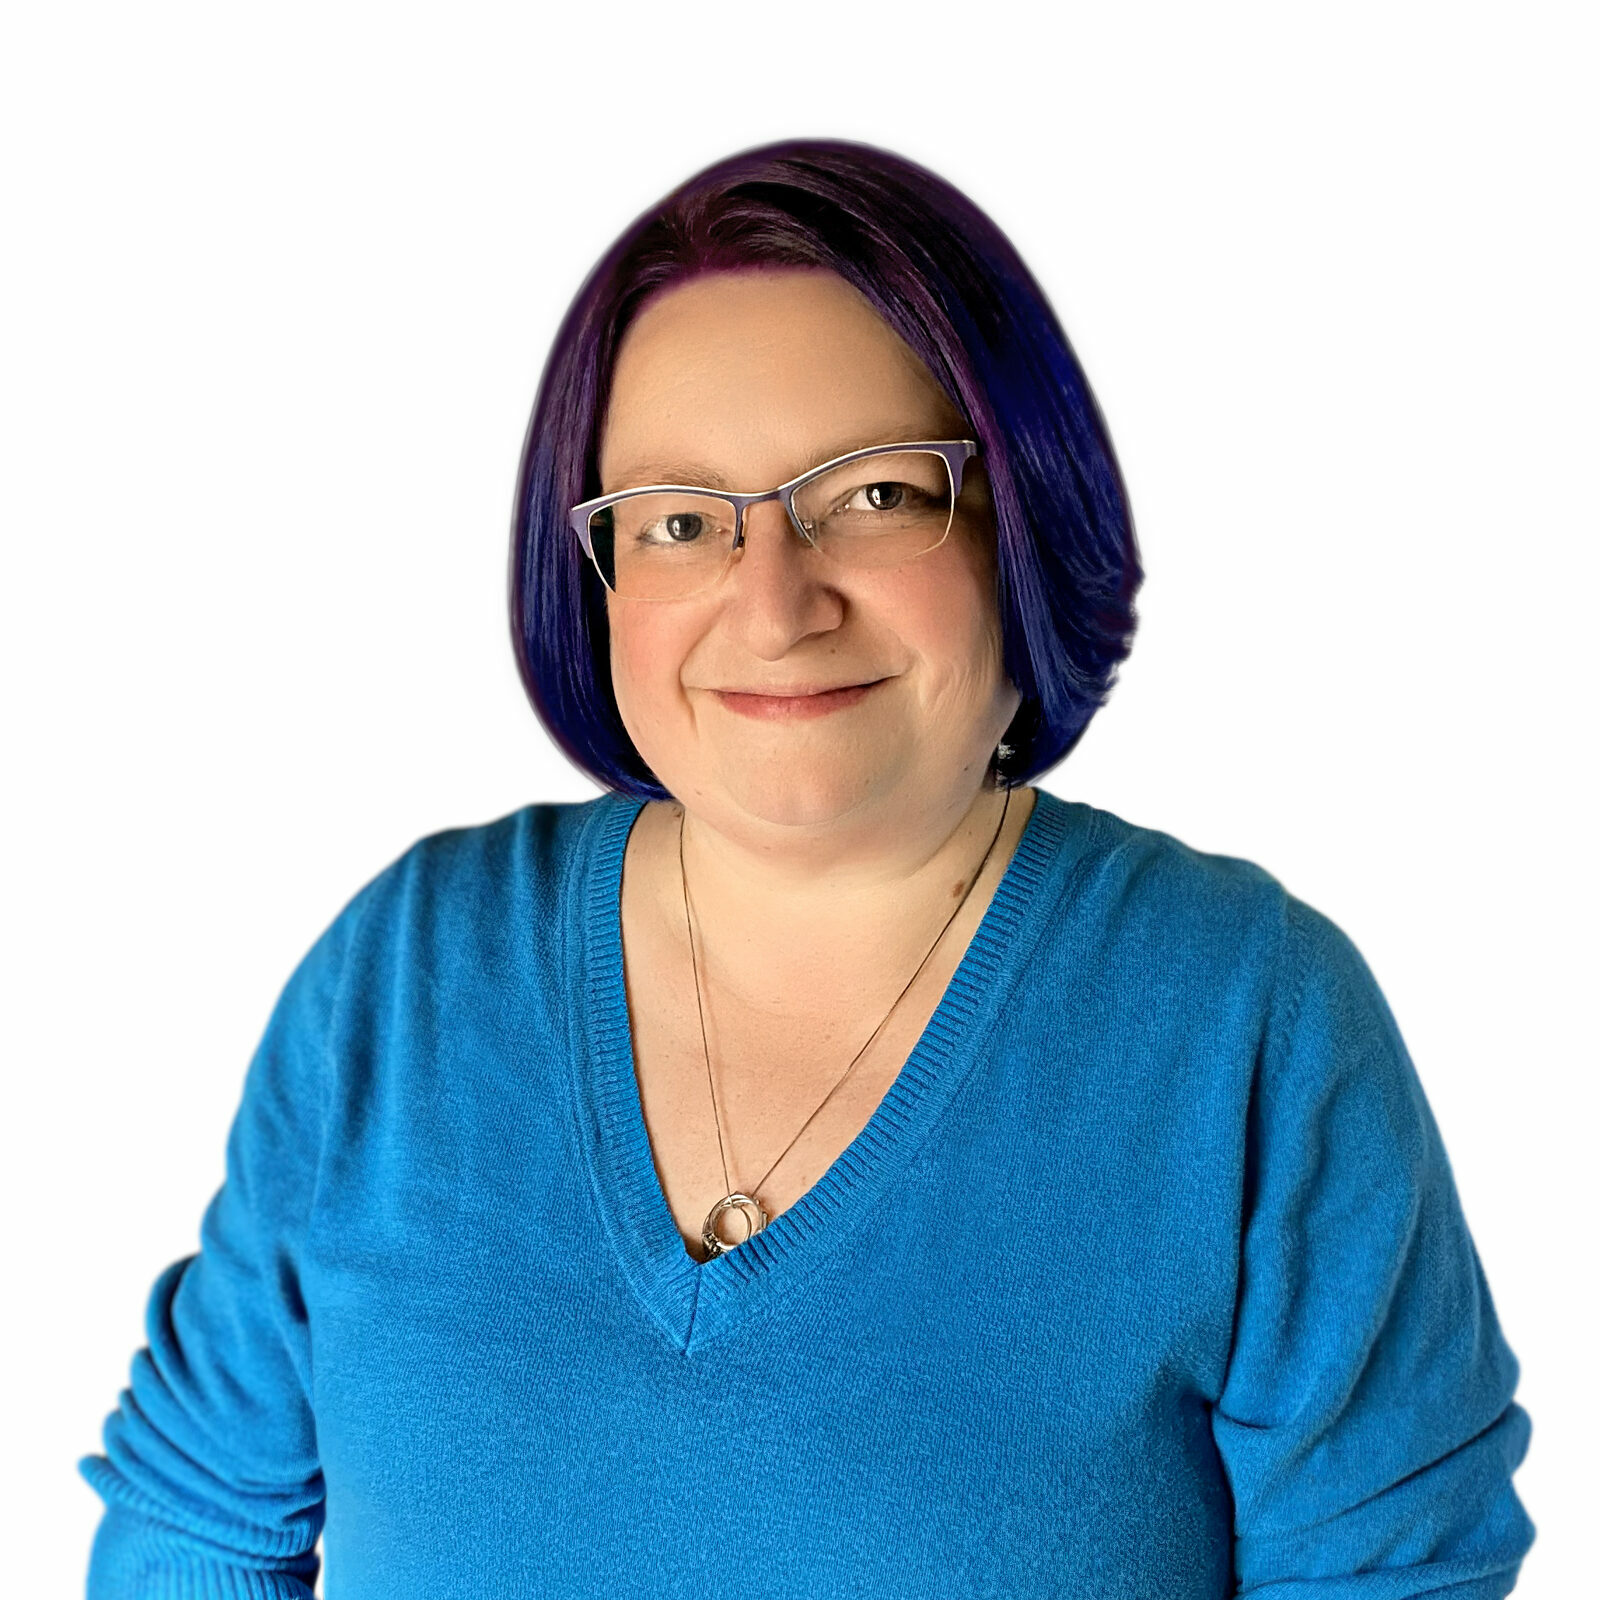 Headshot of Mel Umbarger. The photo is a white woman in her 40s, with purple hair and a blue sweater. She is wearing glasses and smiling.